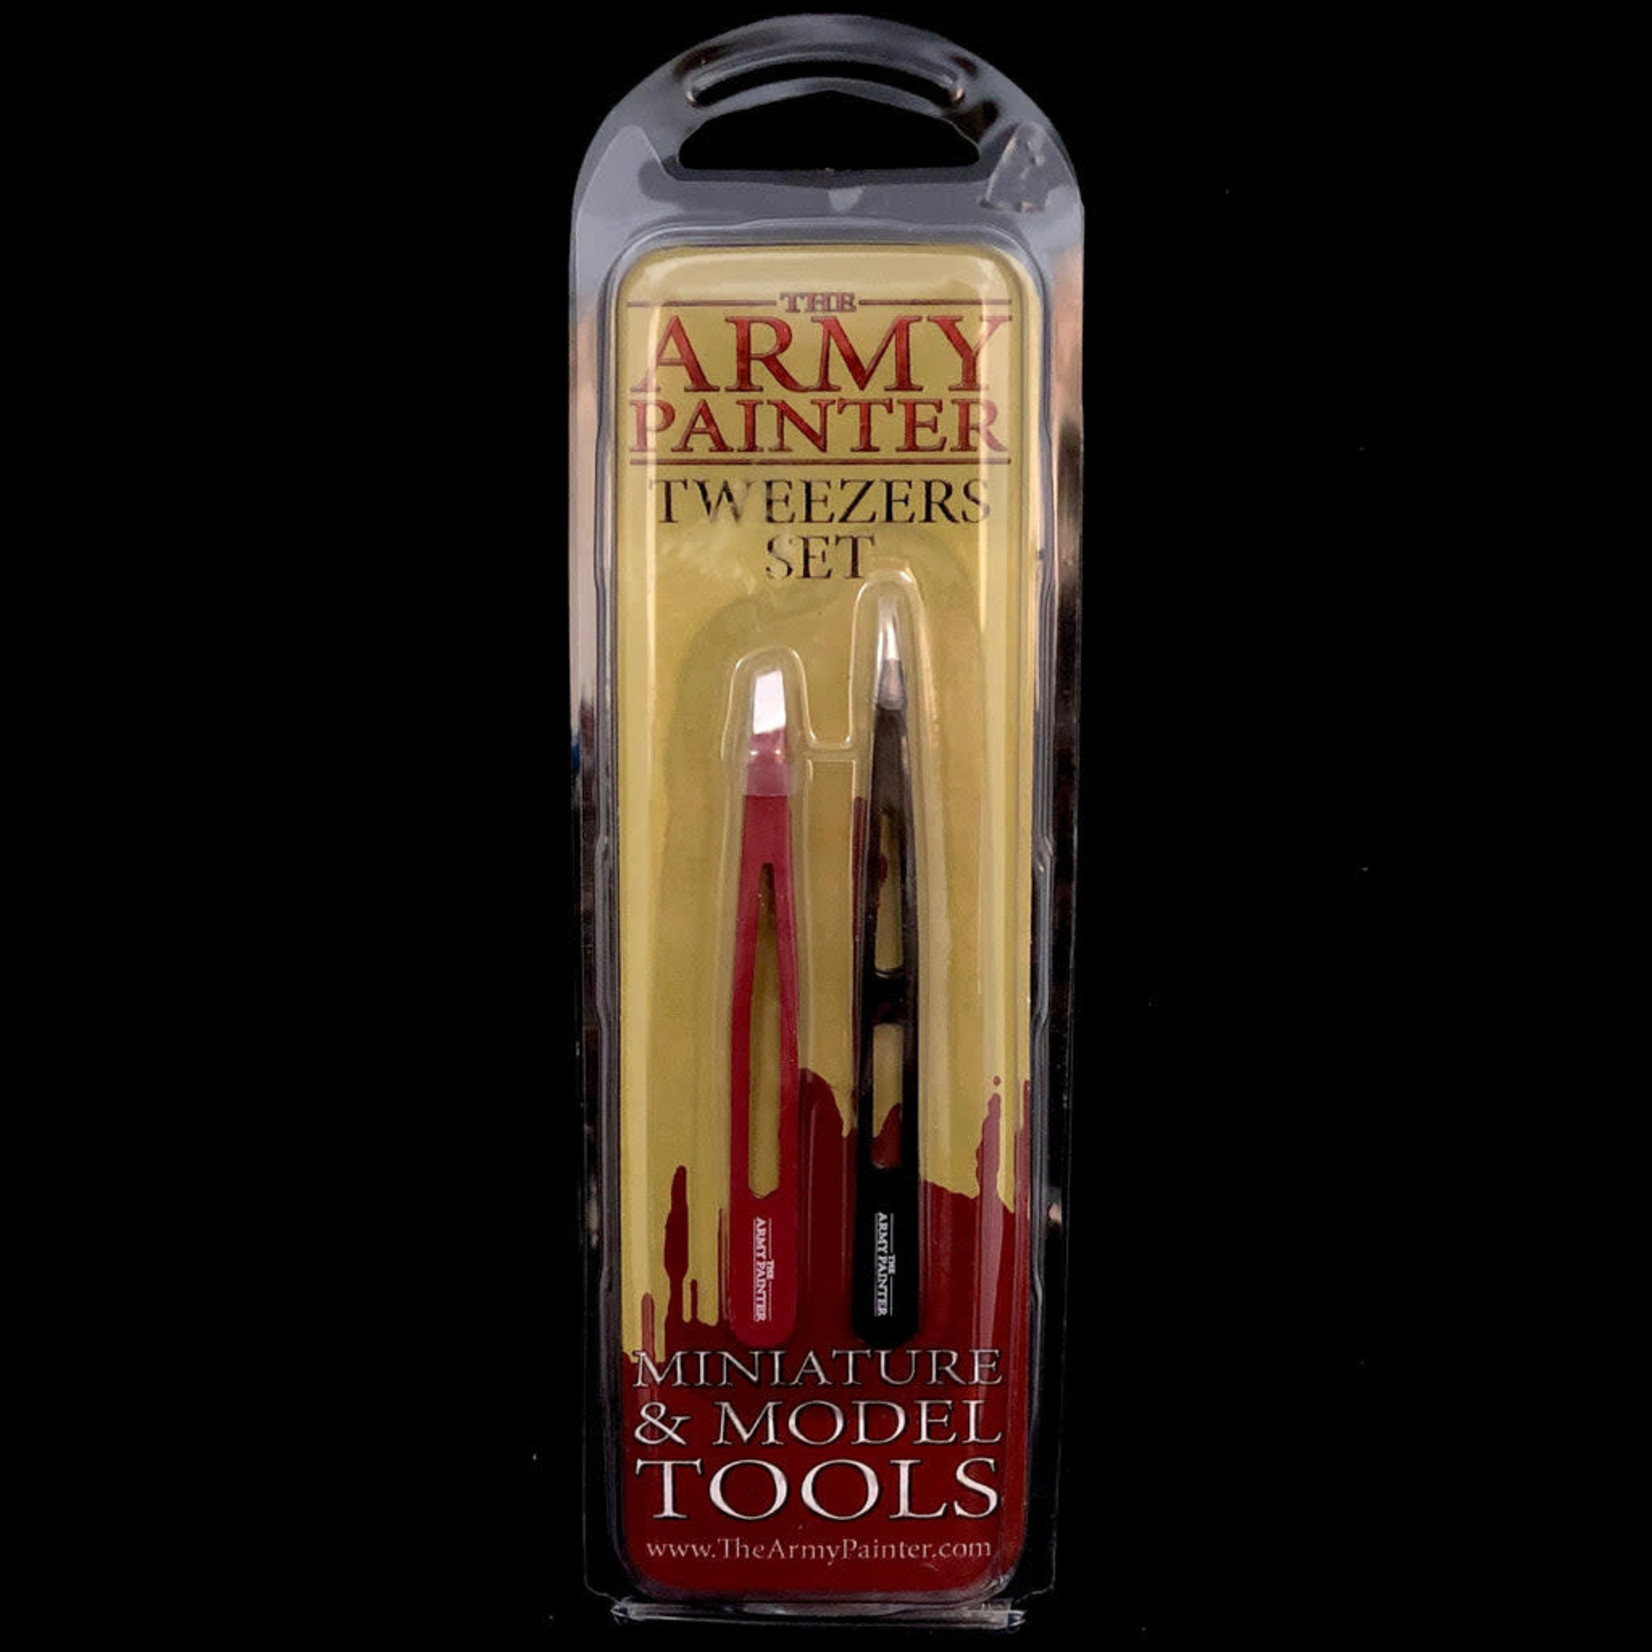 The Army Painter The Army Painter Tweezer Set